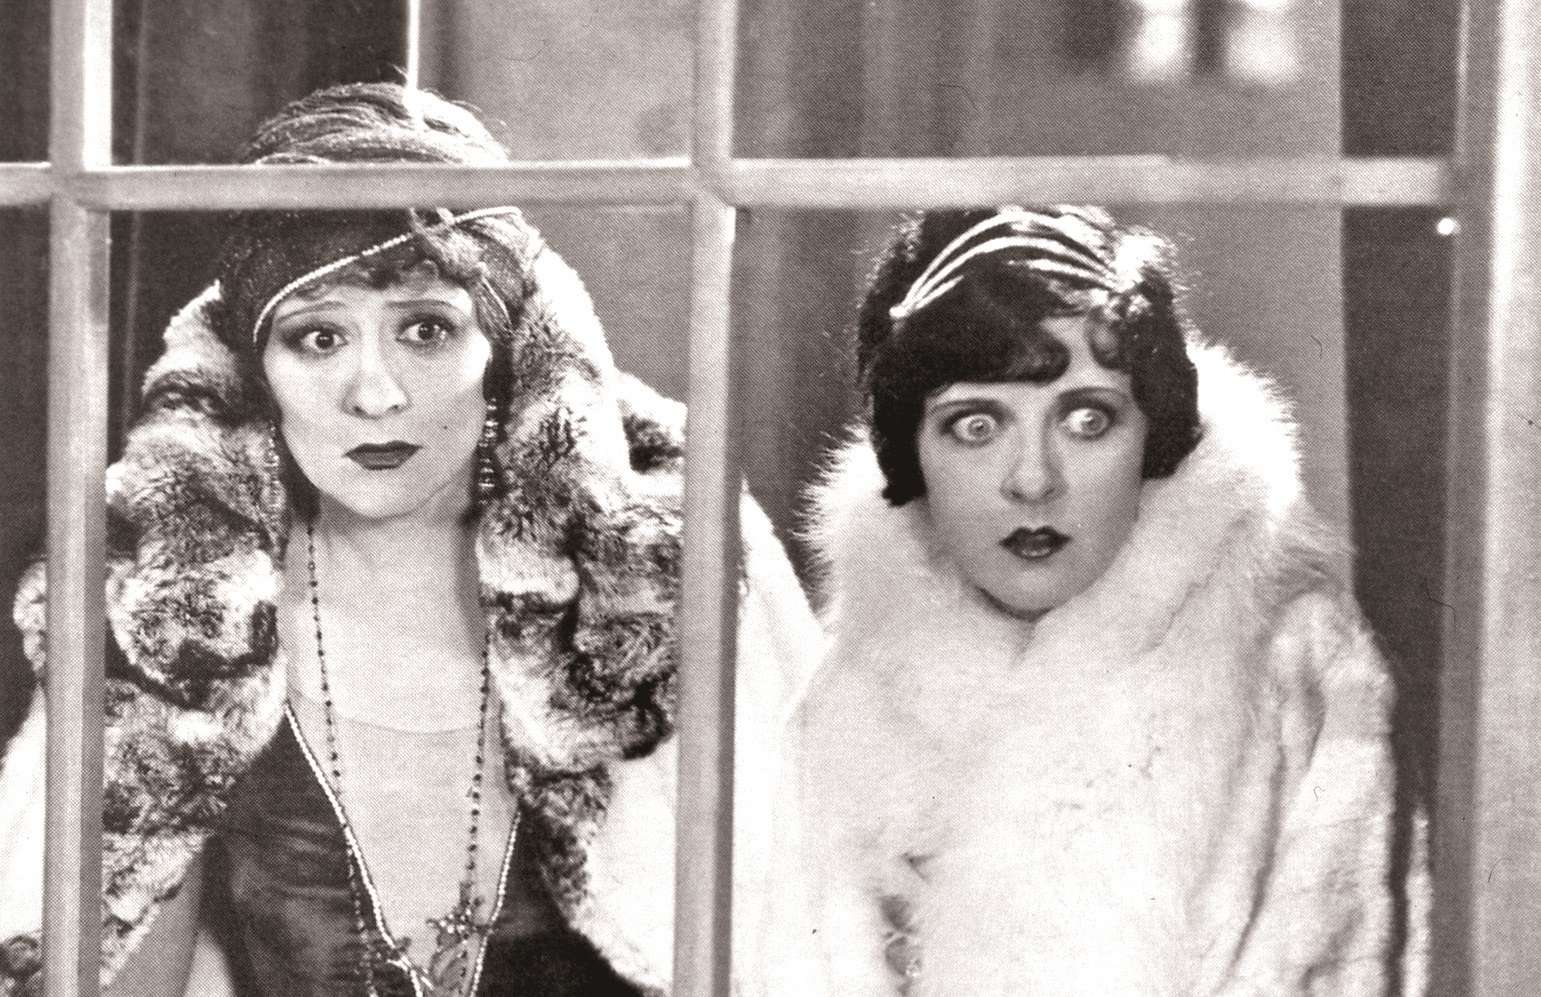 Irene Rich (left) and May McAvoy in Lady Windermere’s Fan, directed by Ernst Lubitsch.